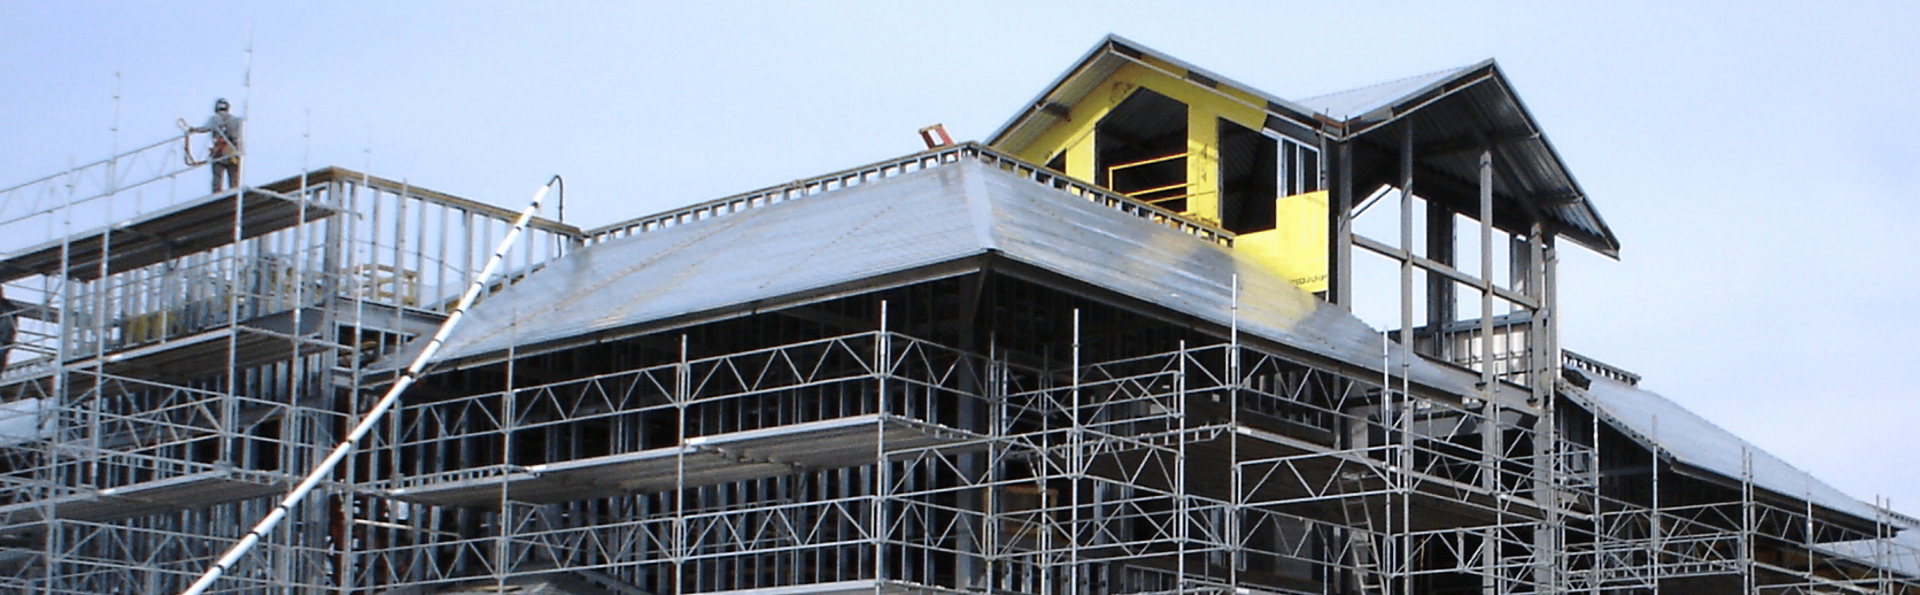 Scaffolding For Education Buildings